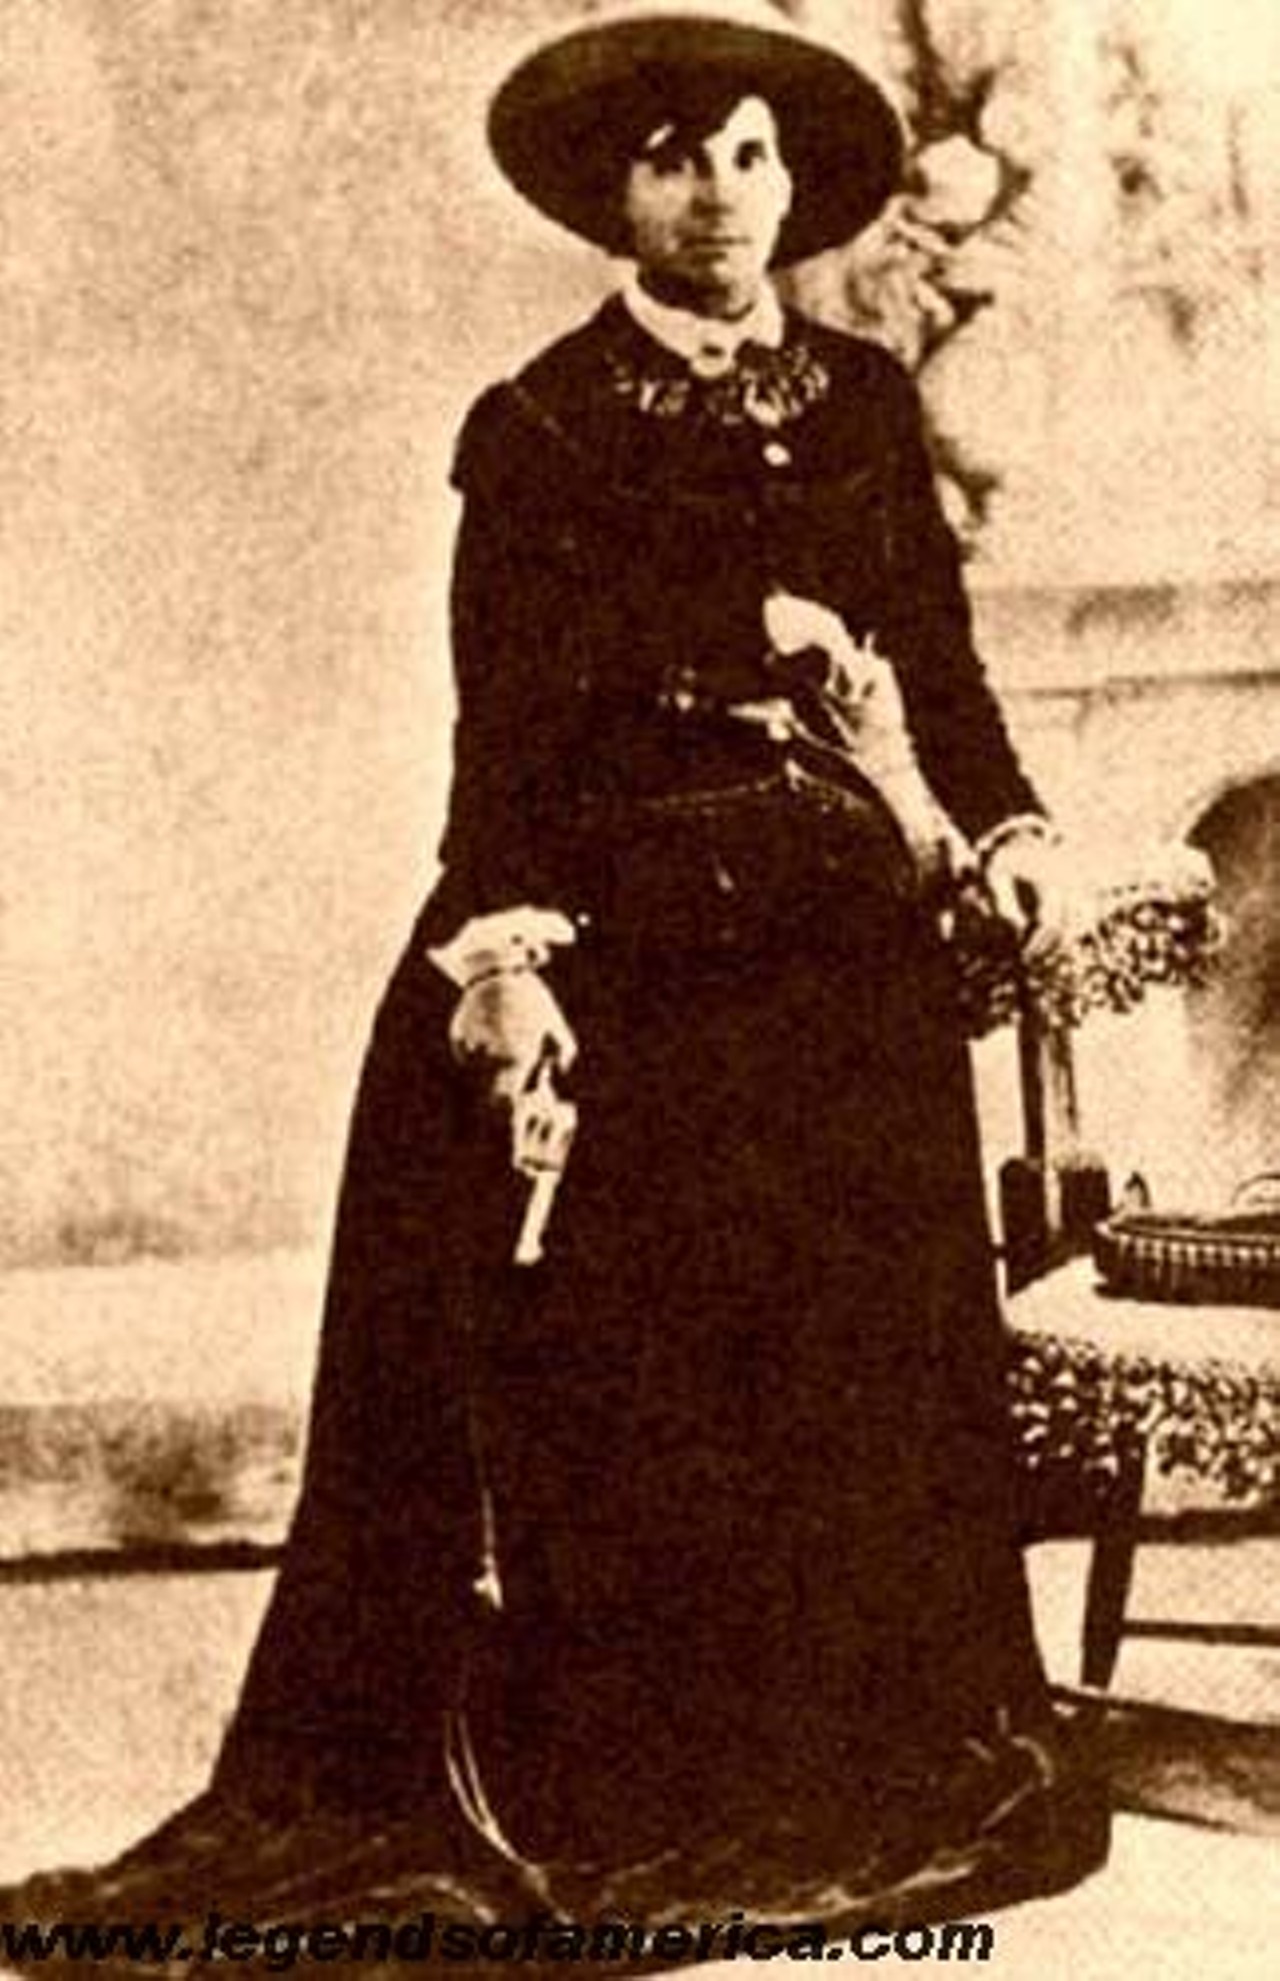 Belle Starr
Sure, packing a six-gun to steal horses isn't the most ladylike behavior. Nor is hanging out with the James gang. But hey, Belle Starr always wore a velvet riding habit and rode sidesaddle. Which just proves that you can still be a badass while behaving ostensibly like a lady.